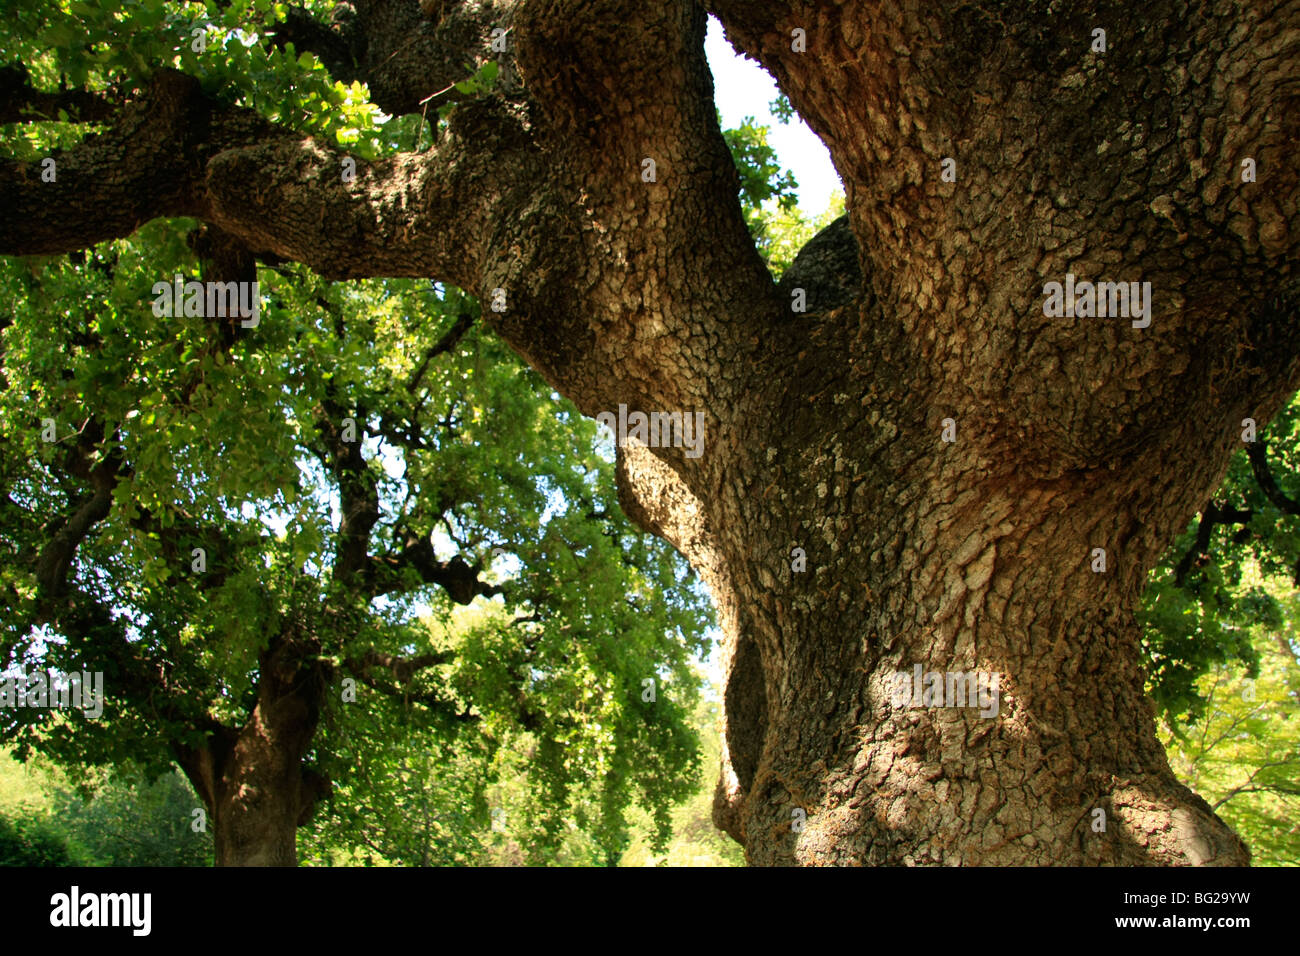 Israel, Upper Galilee, Mount Tabor Oak at Hurshat Tal National Park, in the northern part of the Hula valley Stock Photo